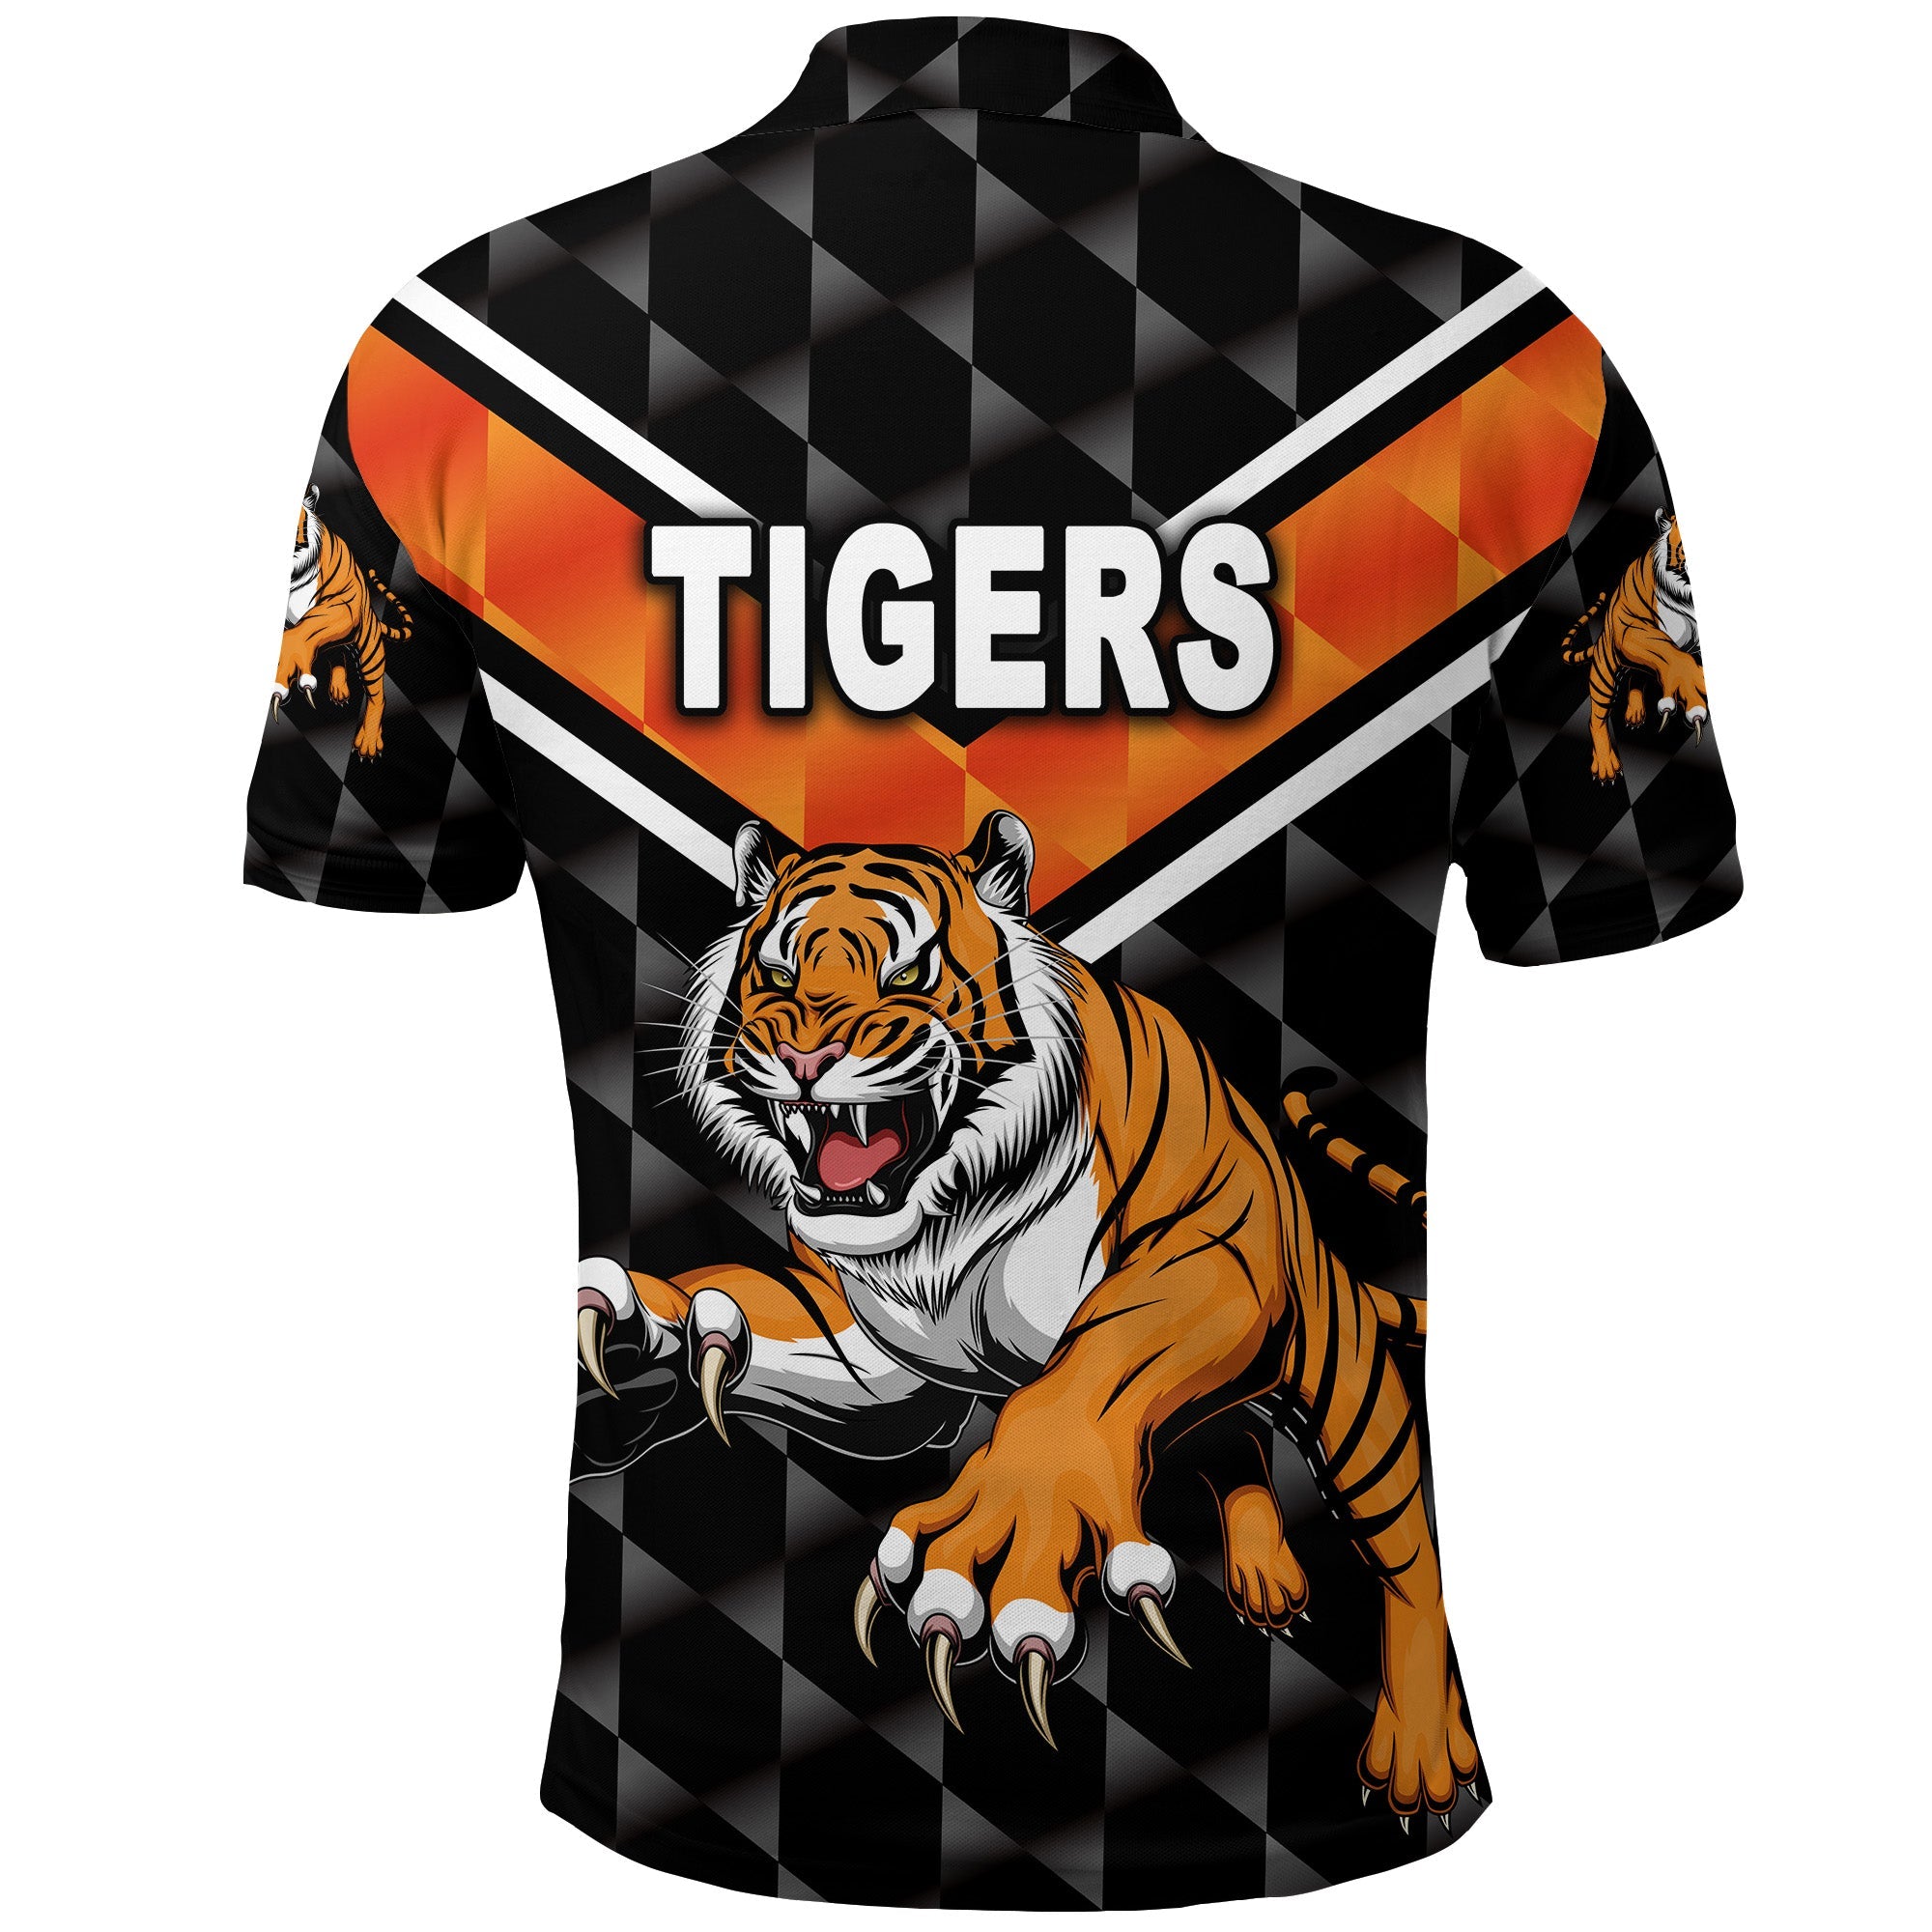 wests-tigers-polo-shirt-original-style-black